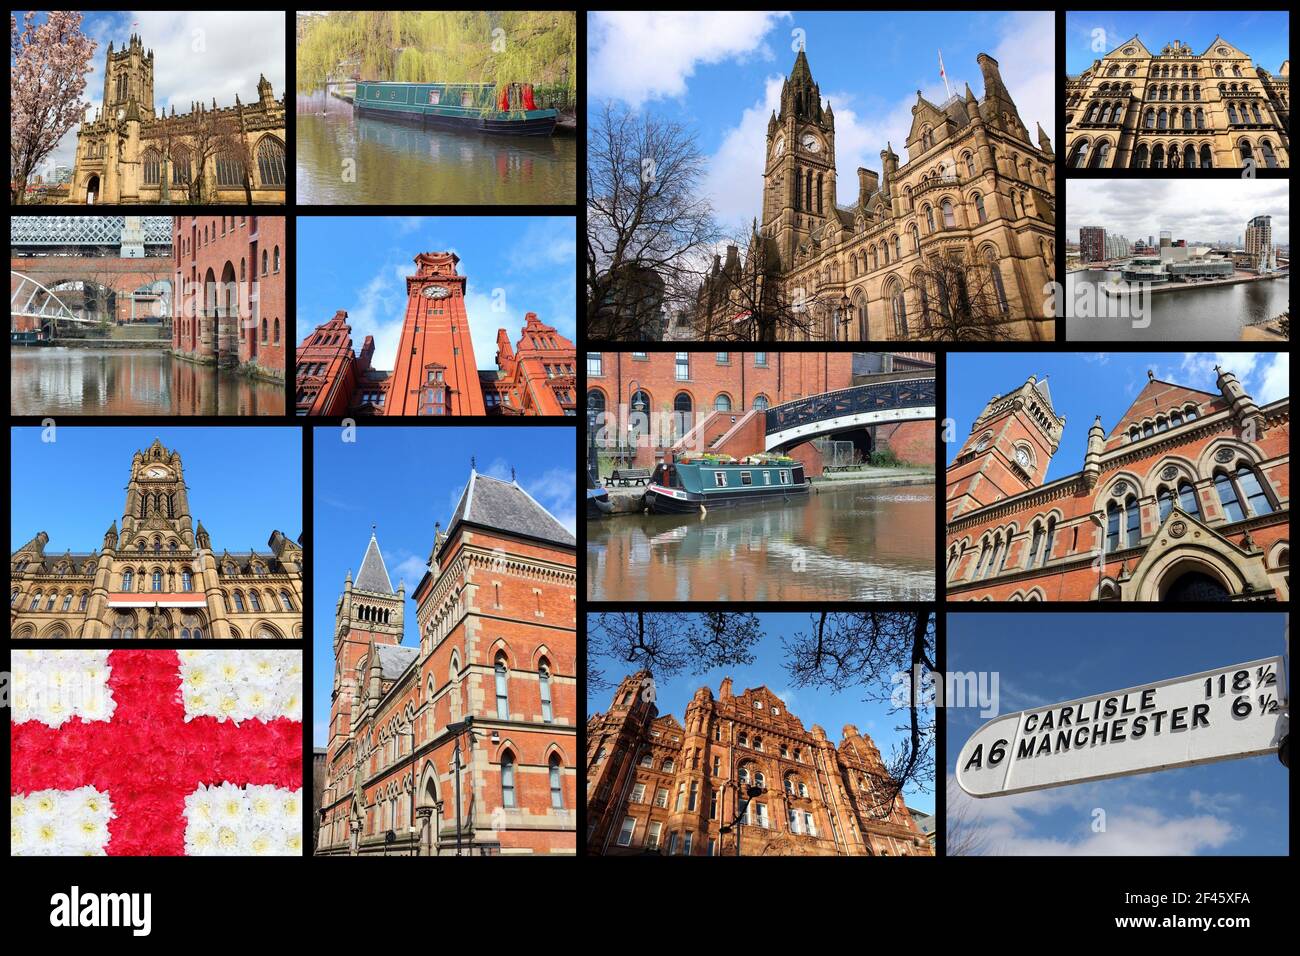 Manchester, UK travel photos collage. Collage includes major landmarks like City Hall, Castlefield waterway district and the Cathedral. Stock Photo